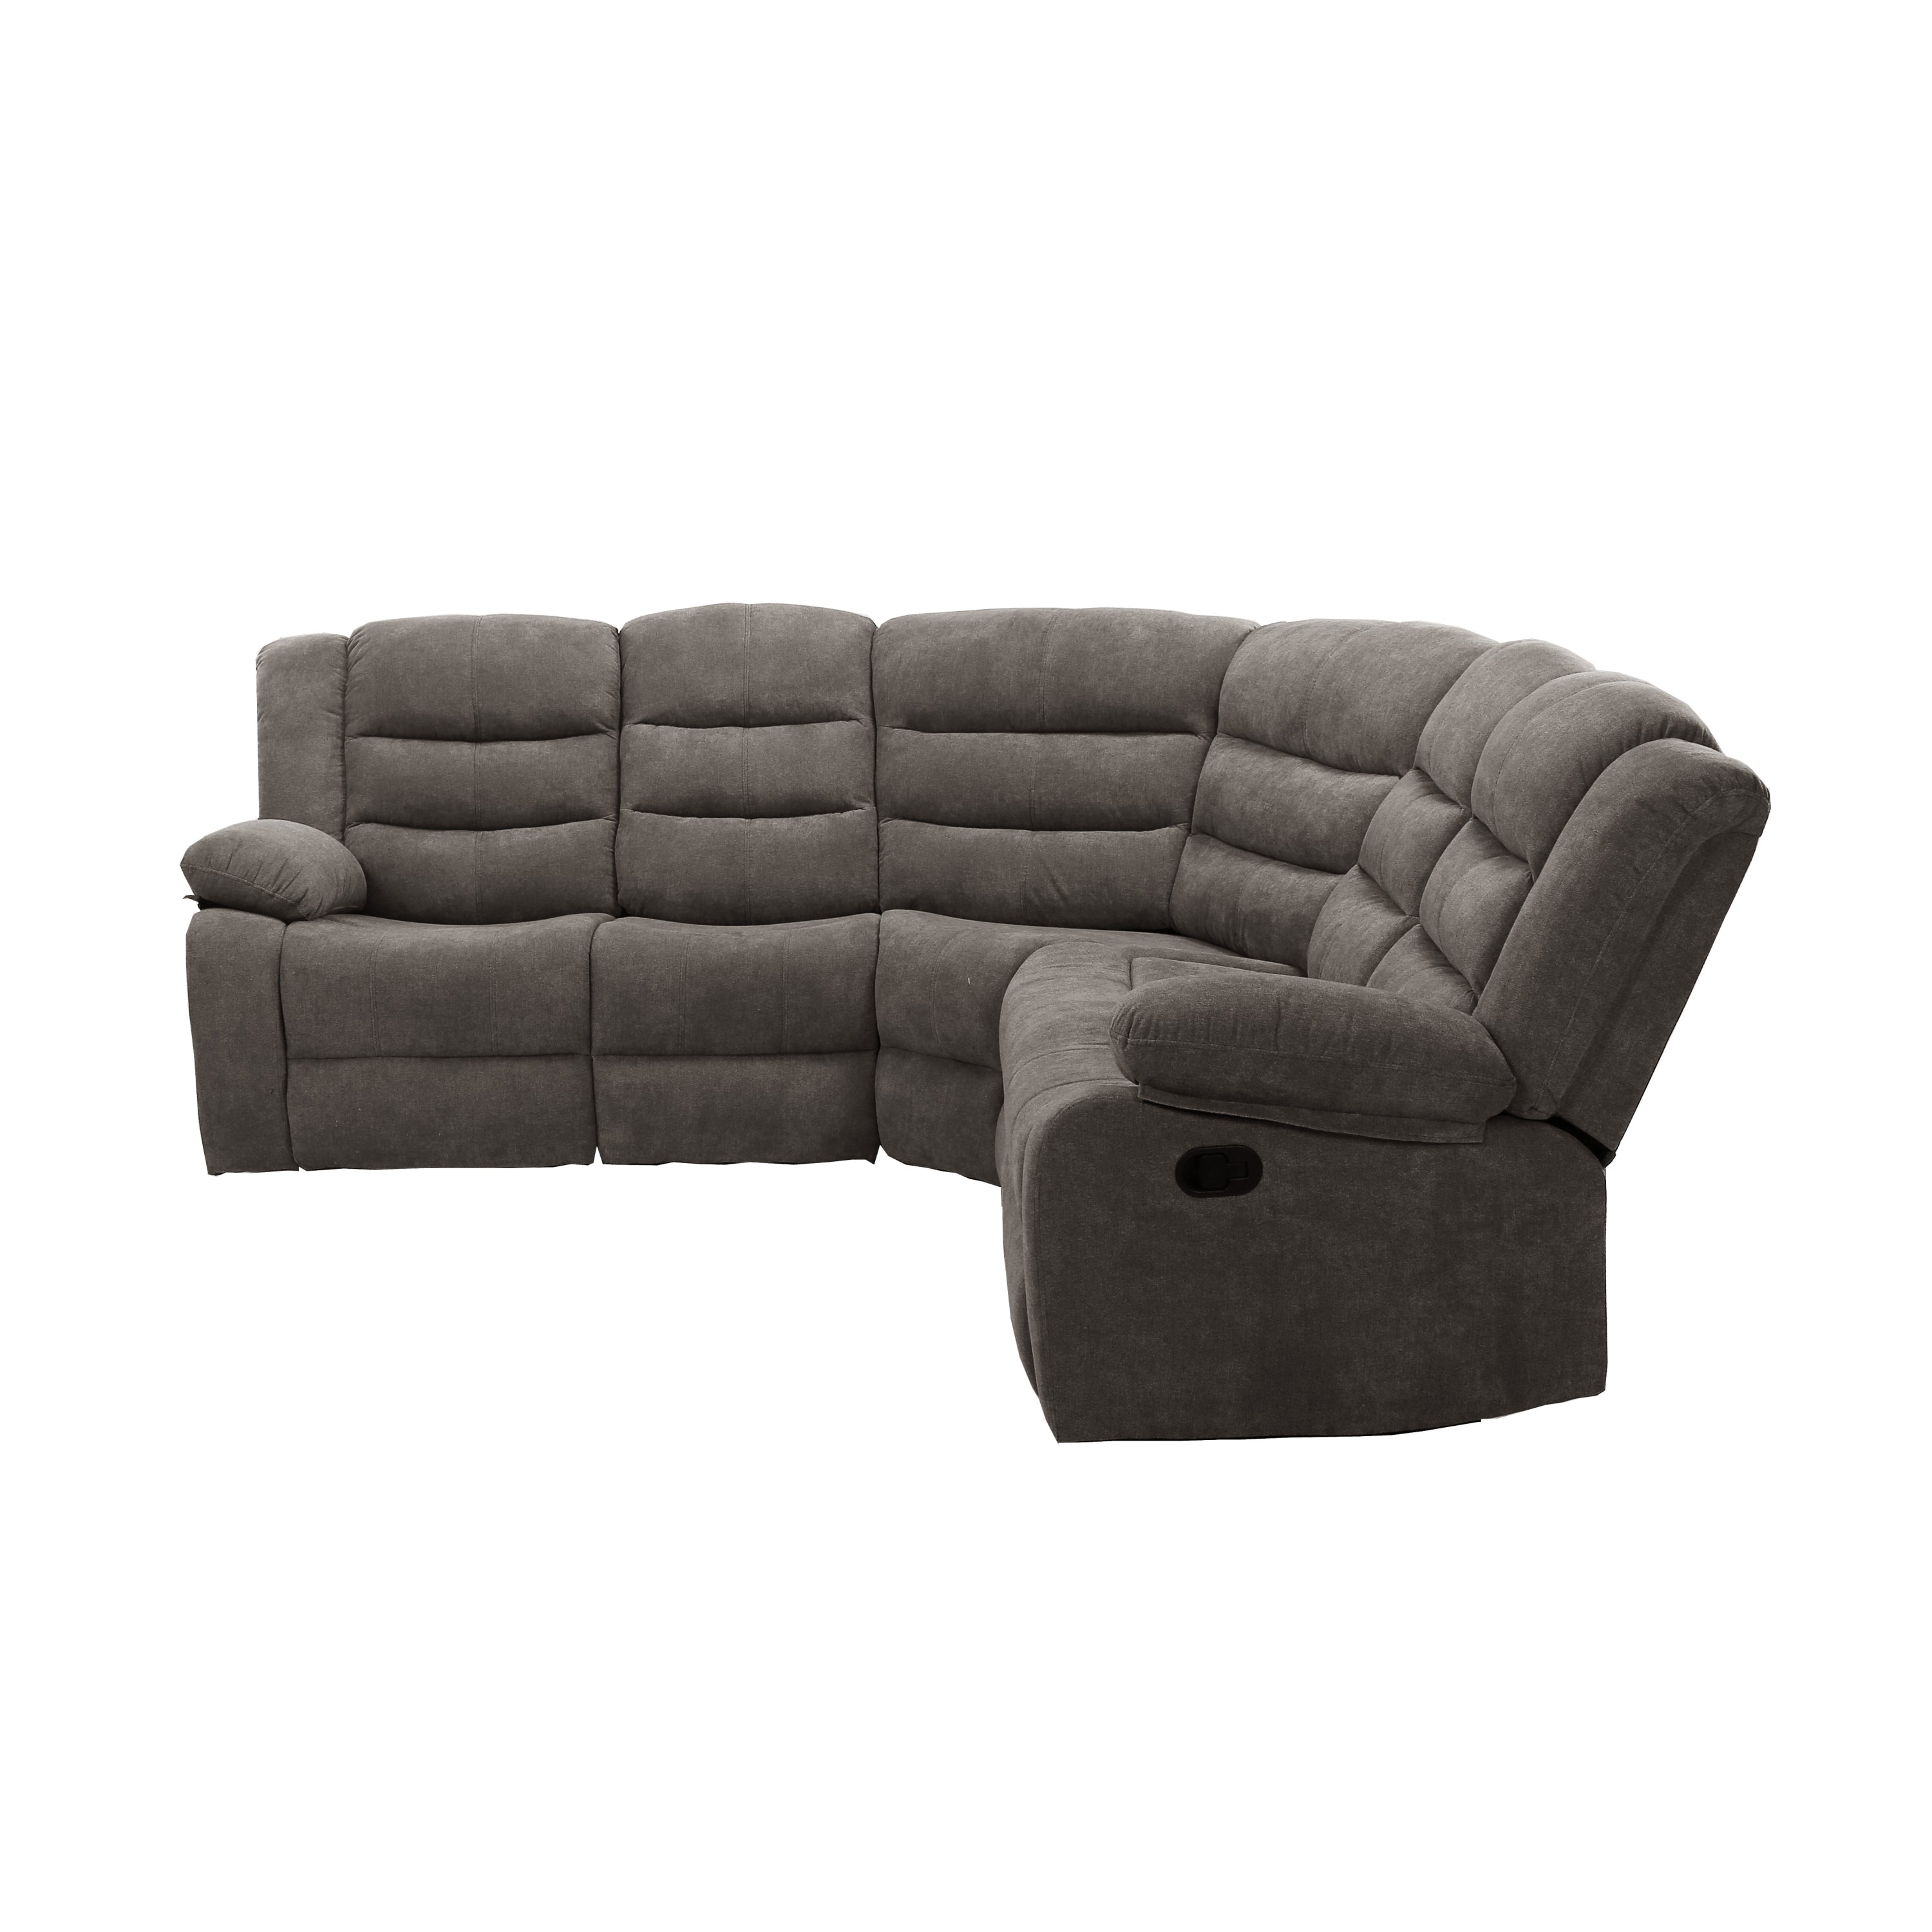 Sectional Manual Recliner Living Room Set (Gray)